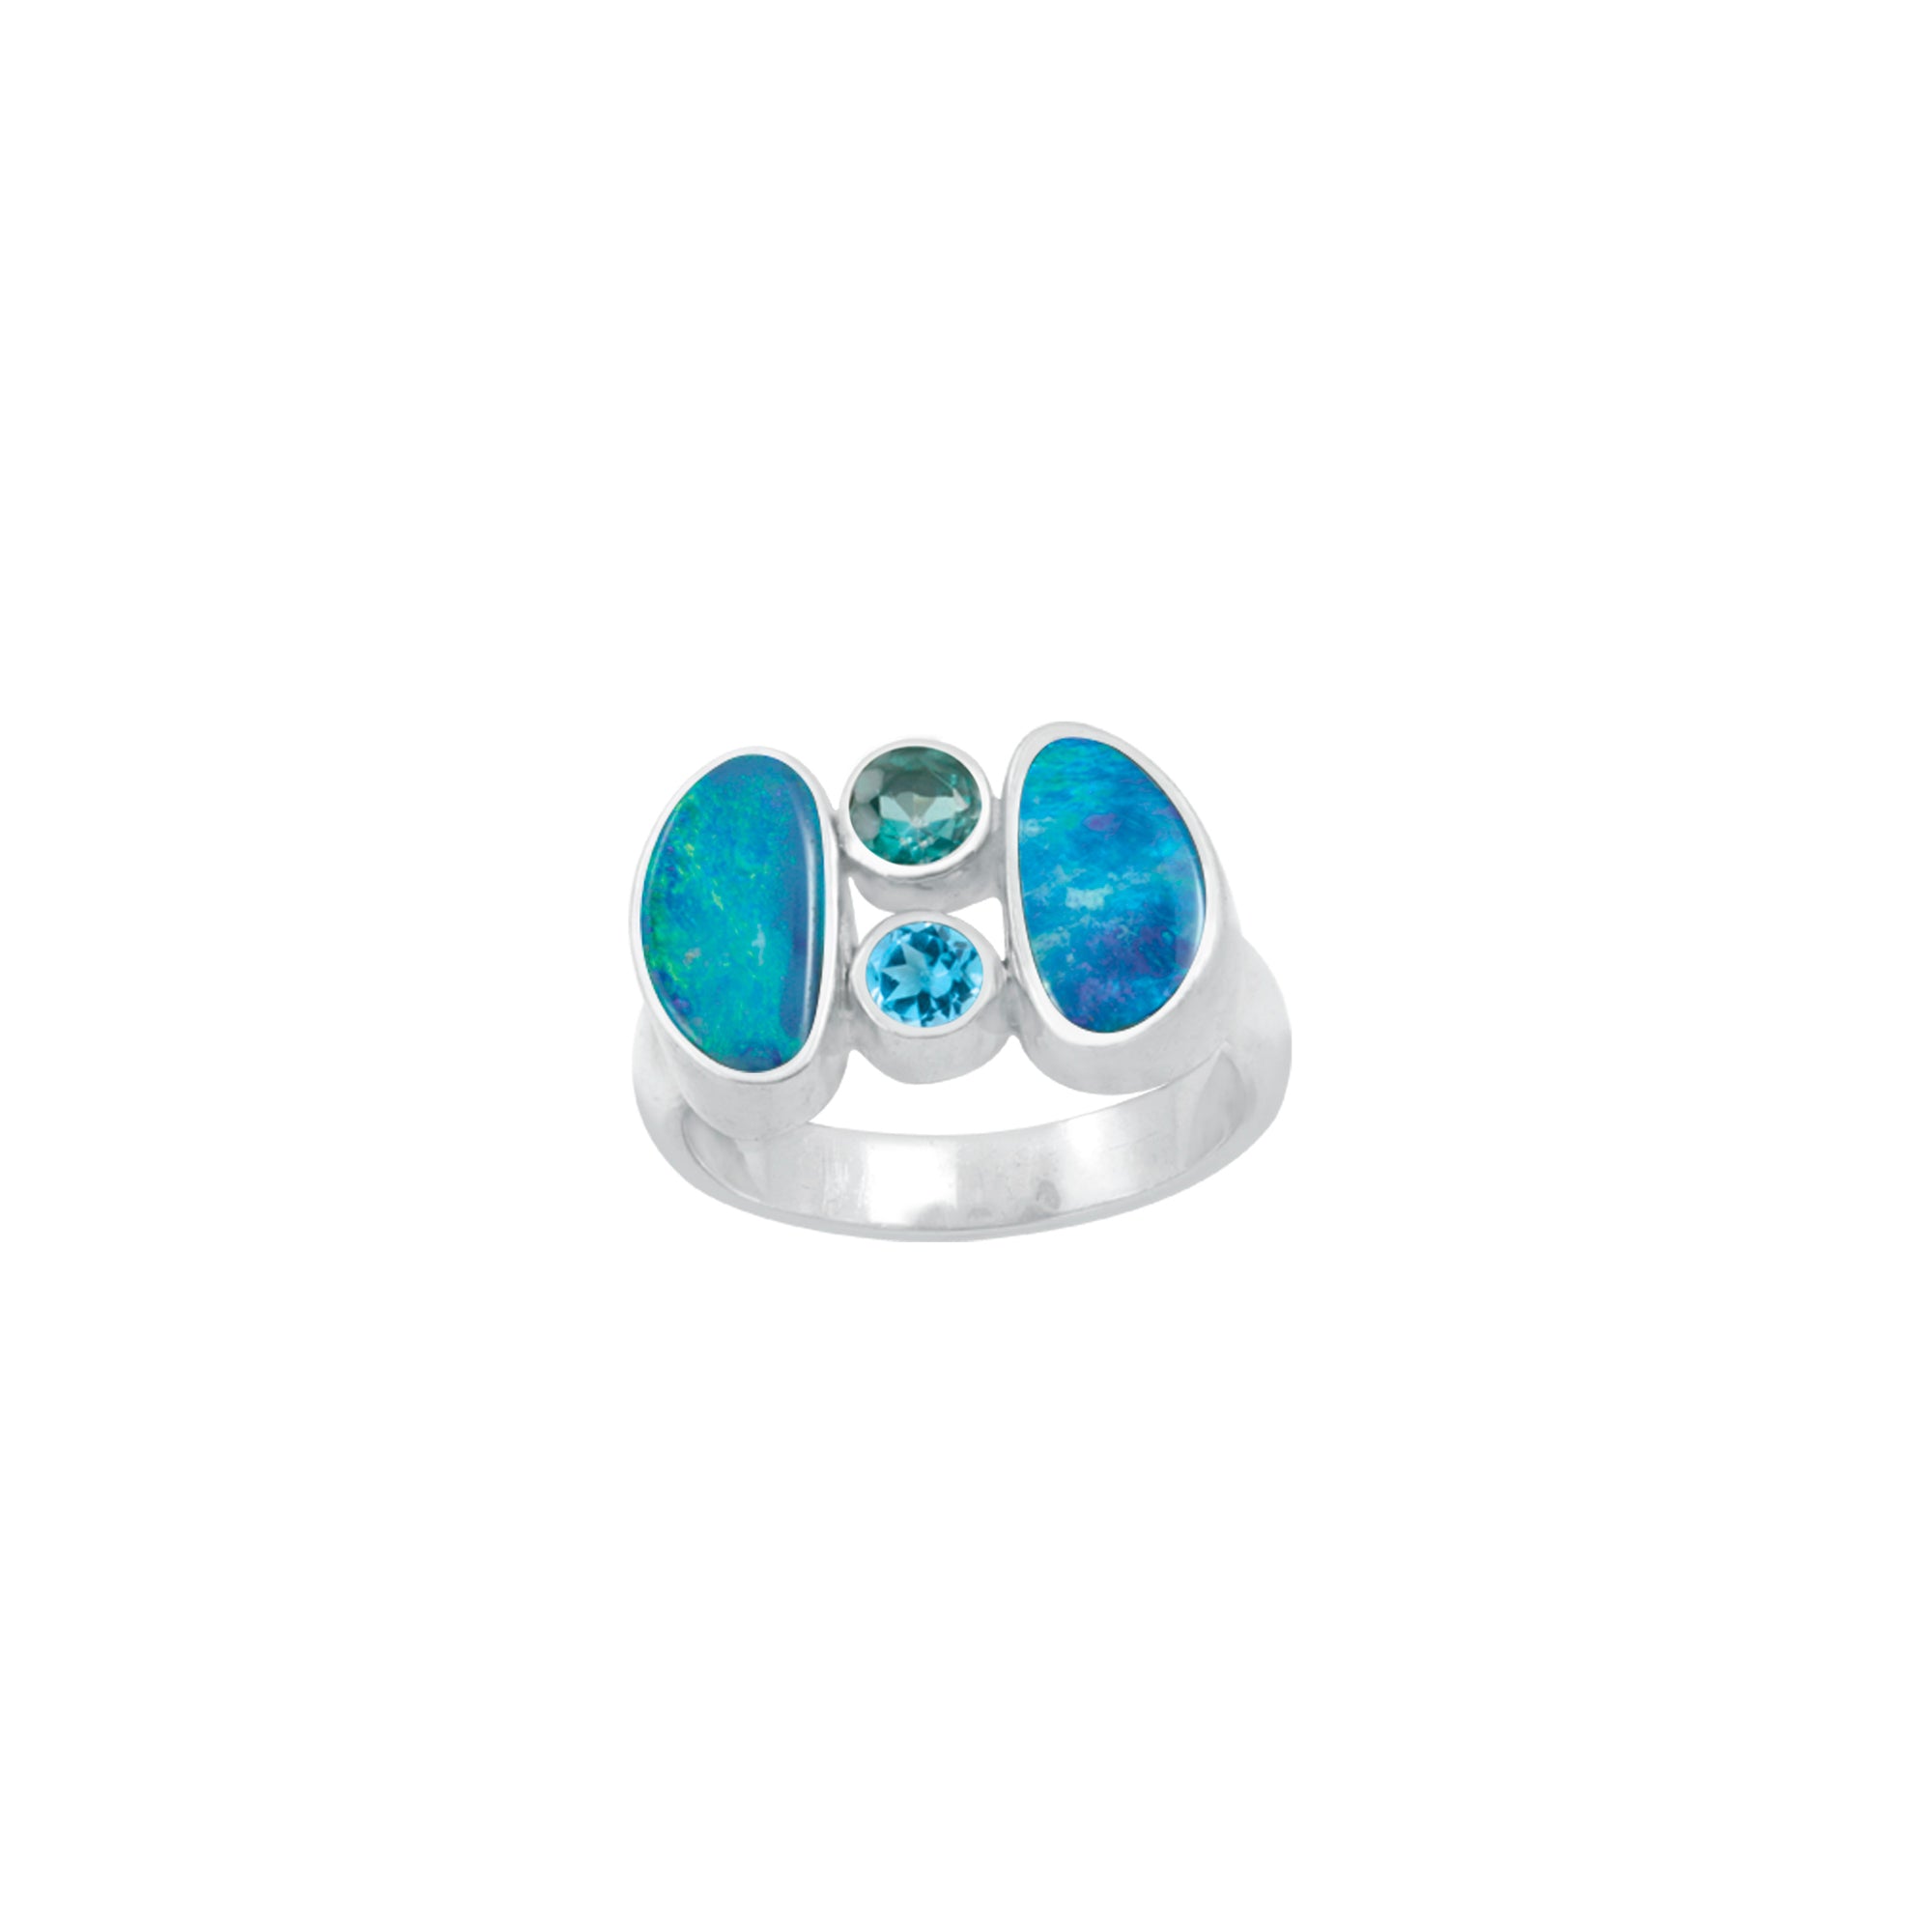 Silver Ring With Opal Free Form, Green & Blue Topaz Round